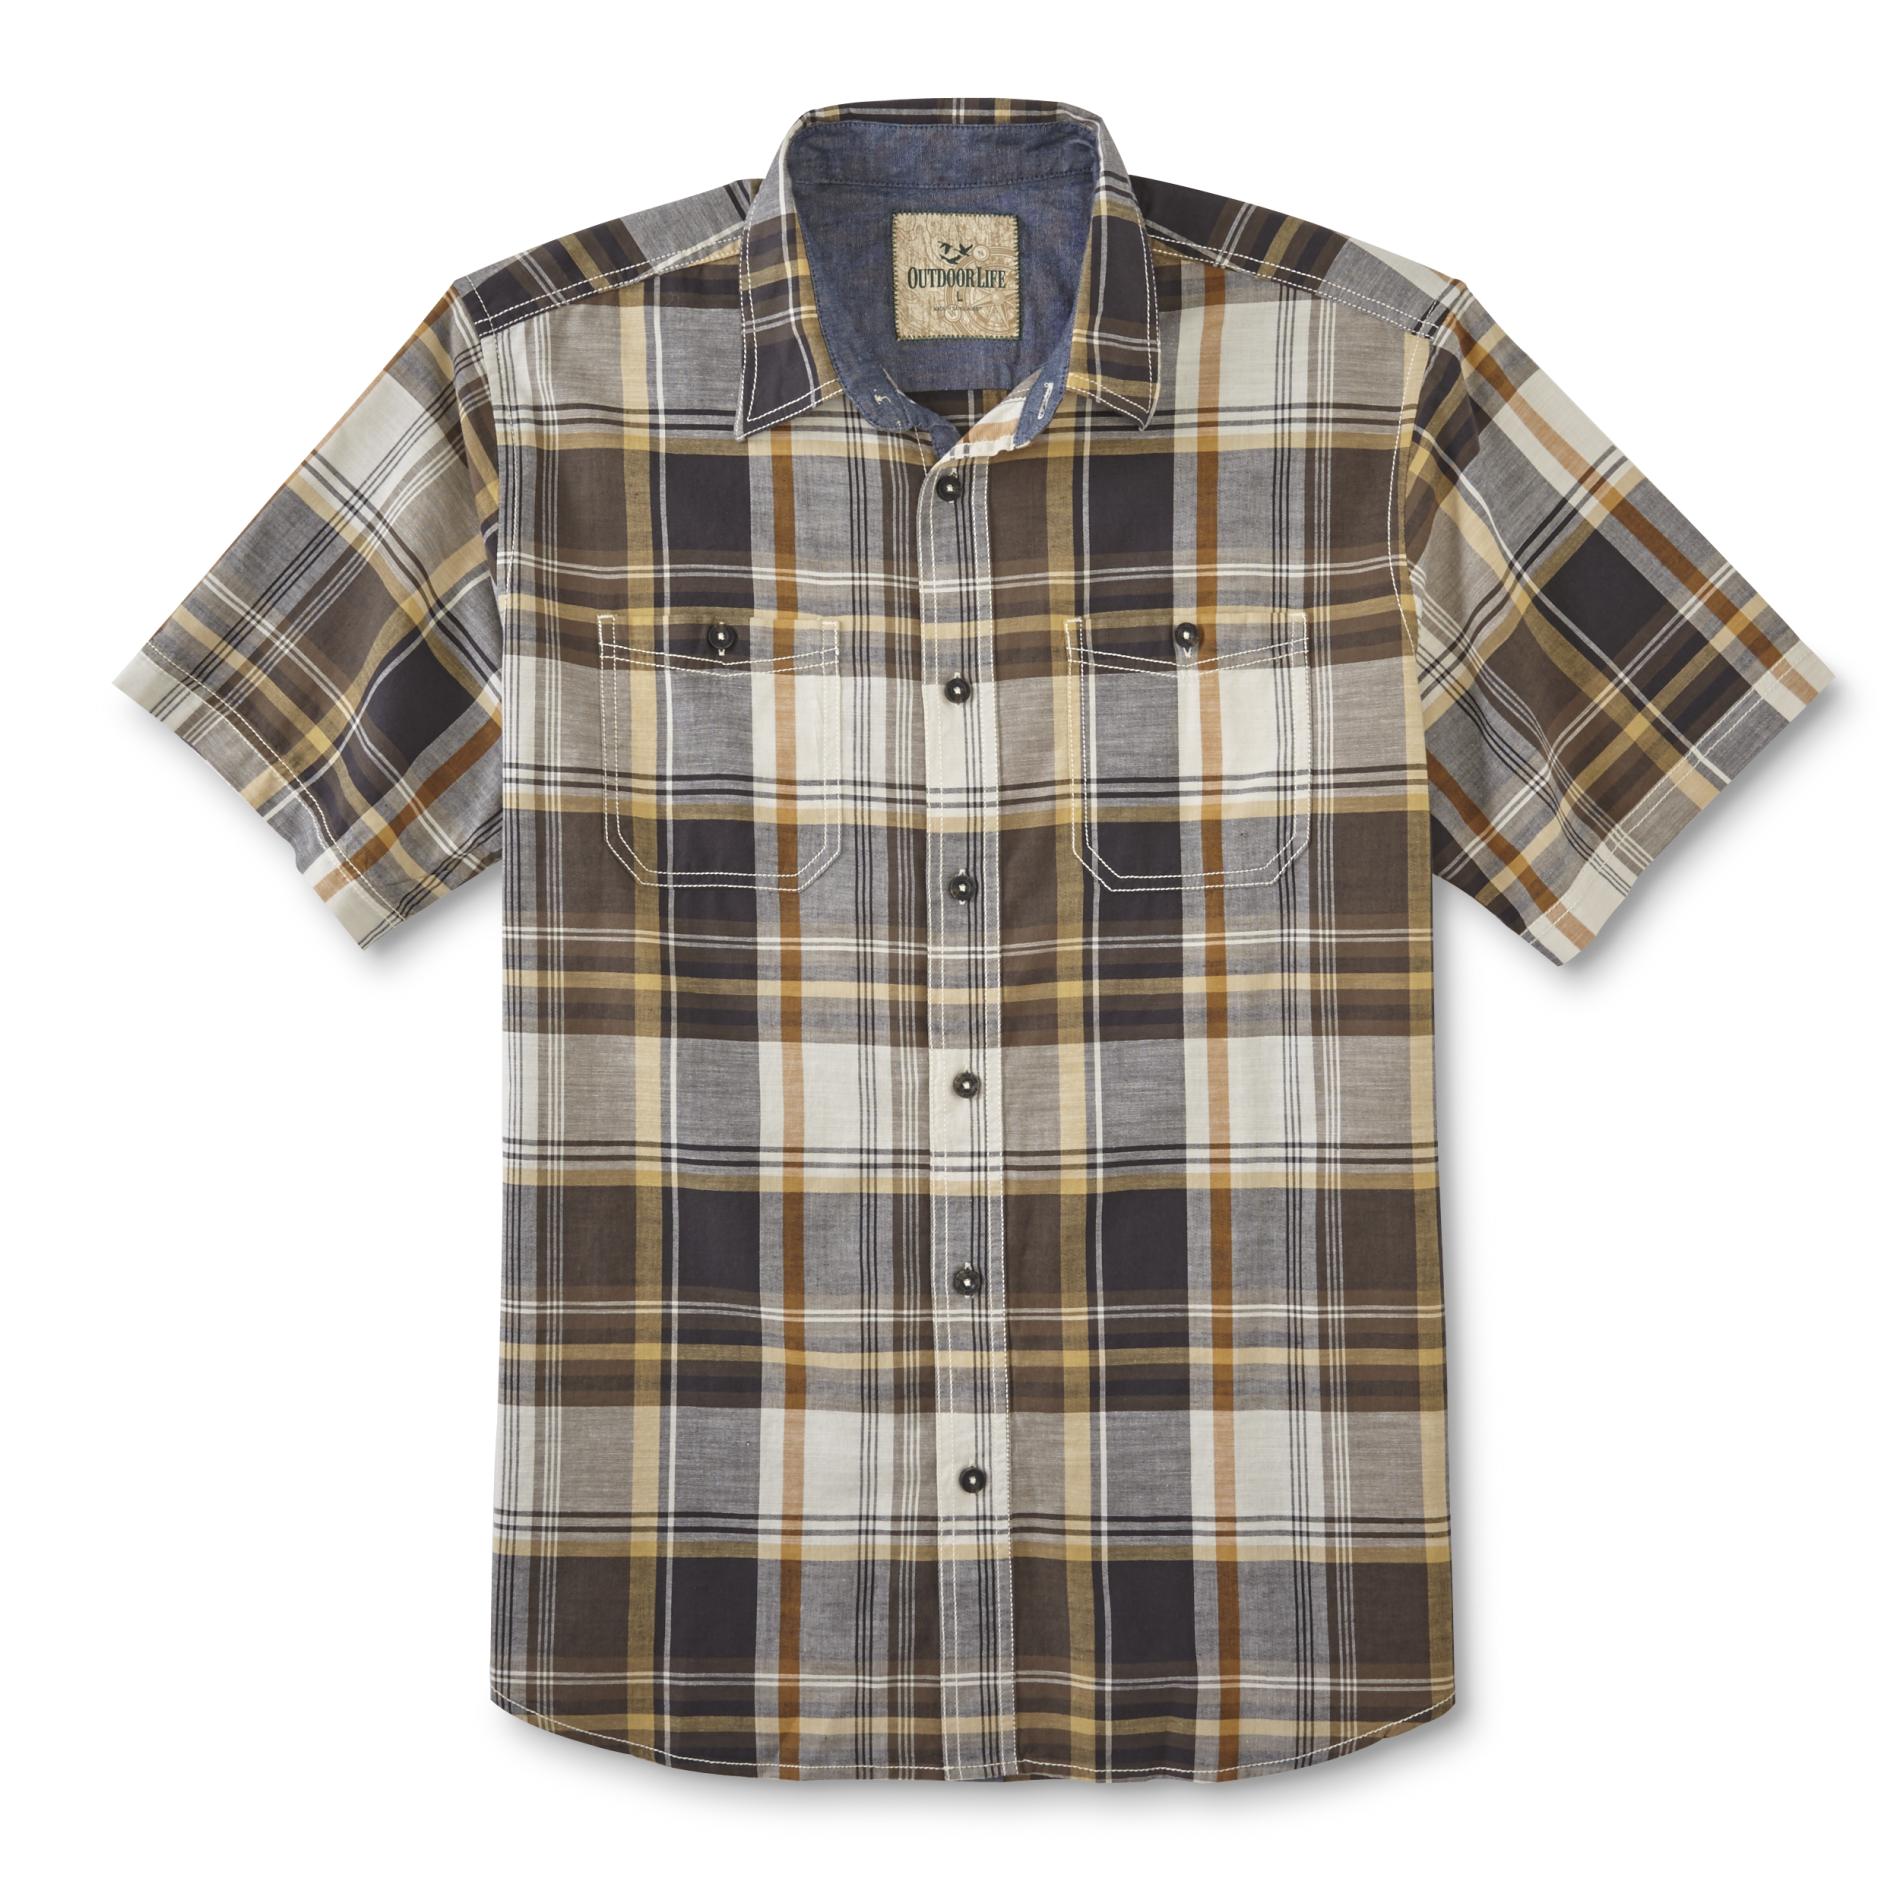 Outdoor Life Men's Big & Tall Discovery Button-Front Shirt - Plaid